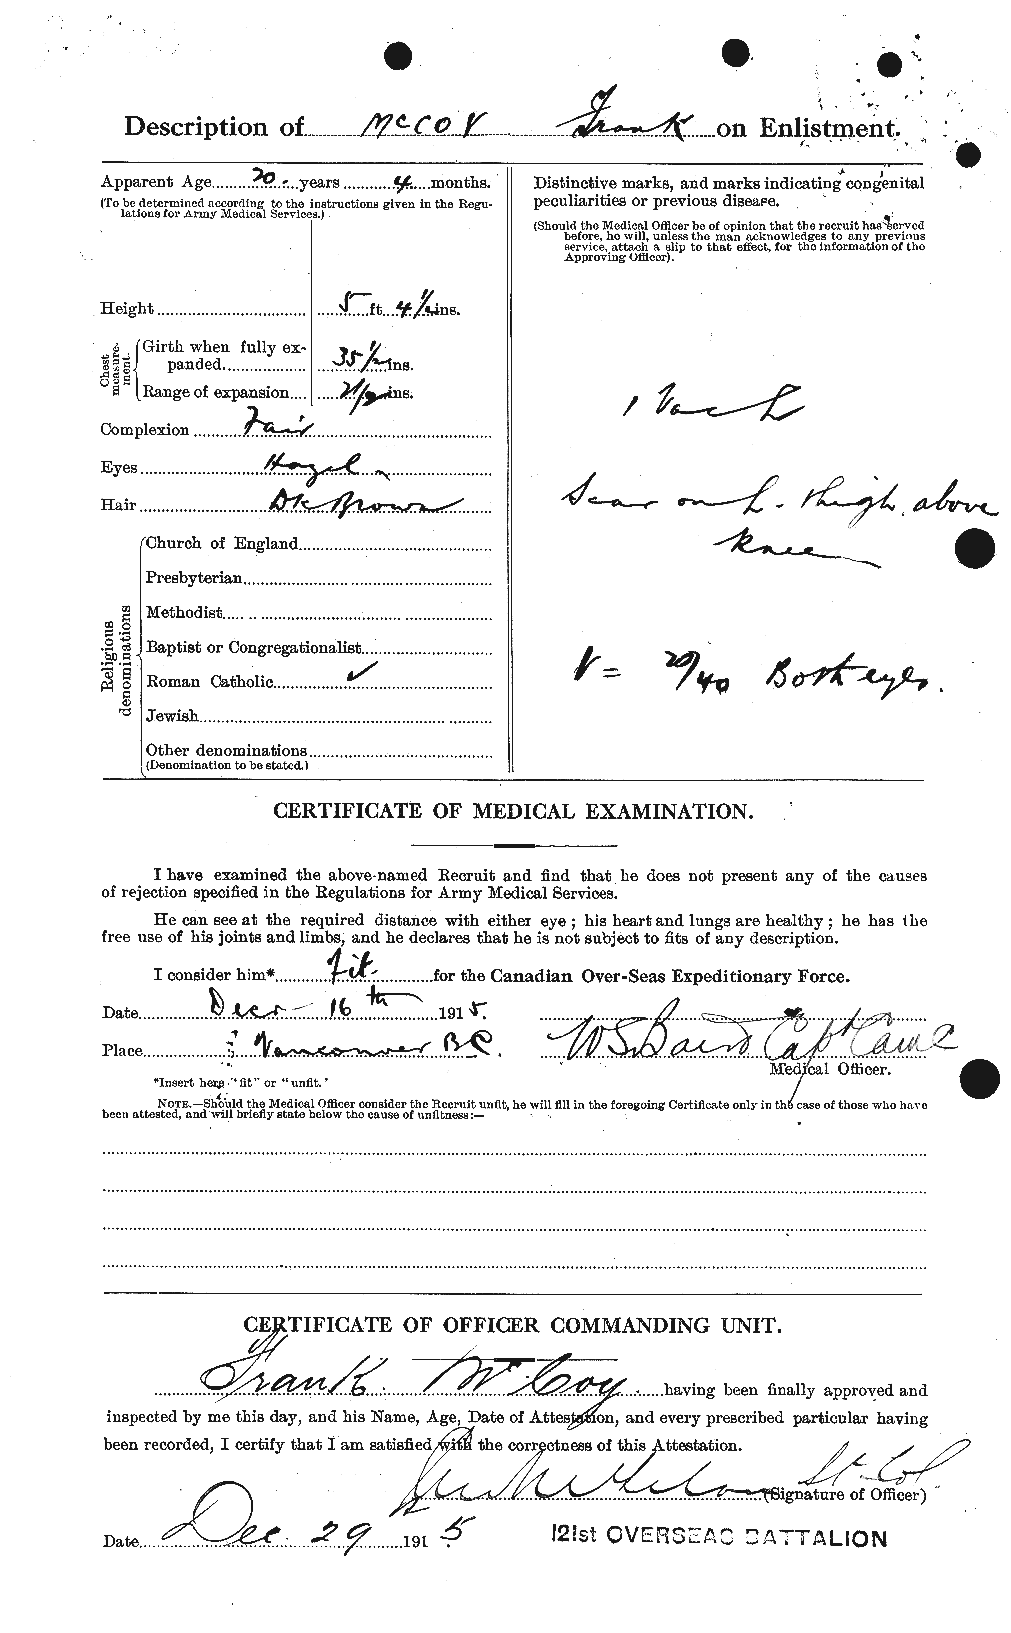 Personnel Records of the First World War - CEF 134861b